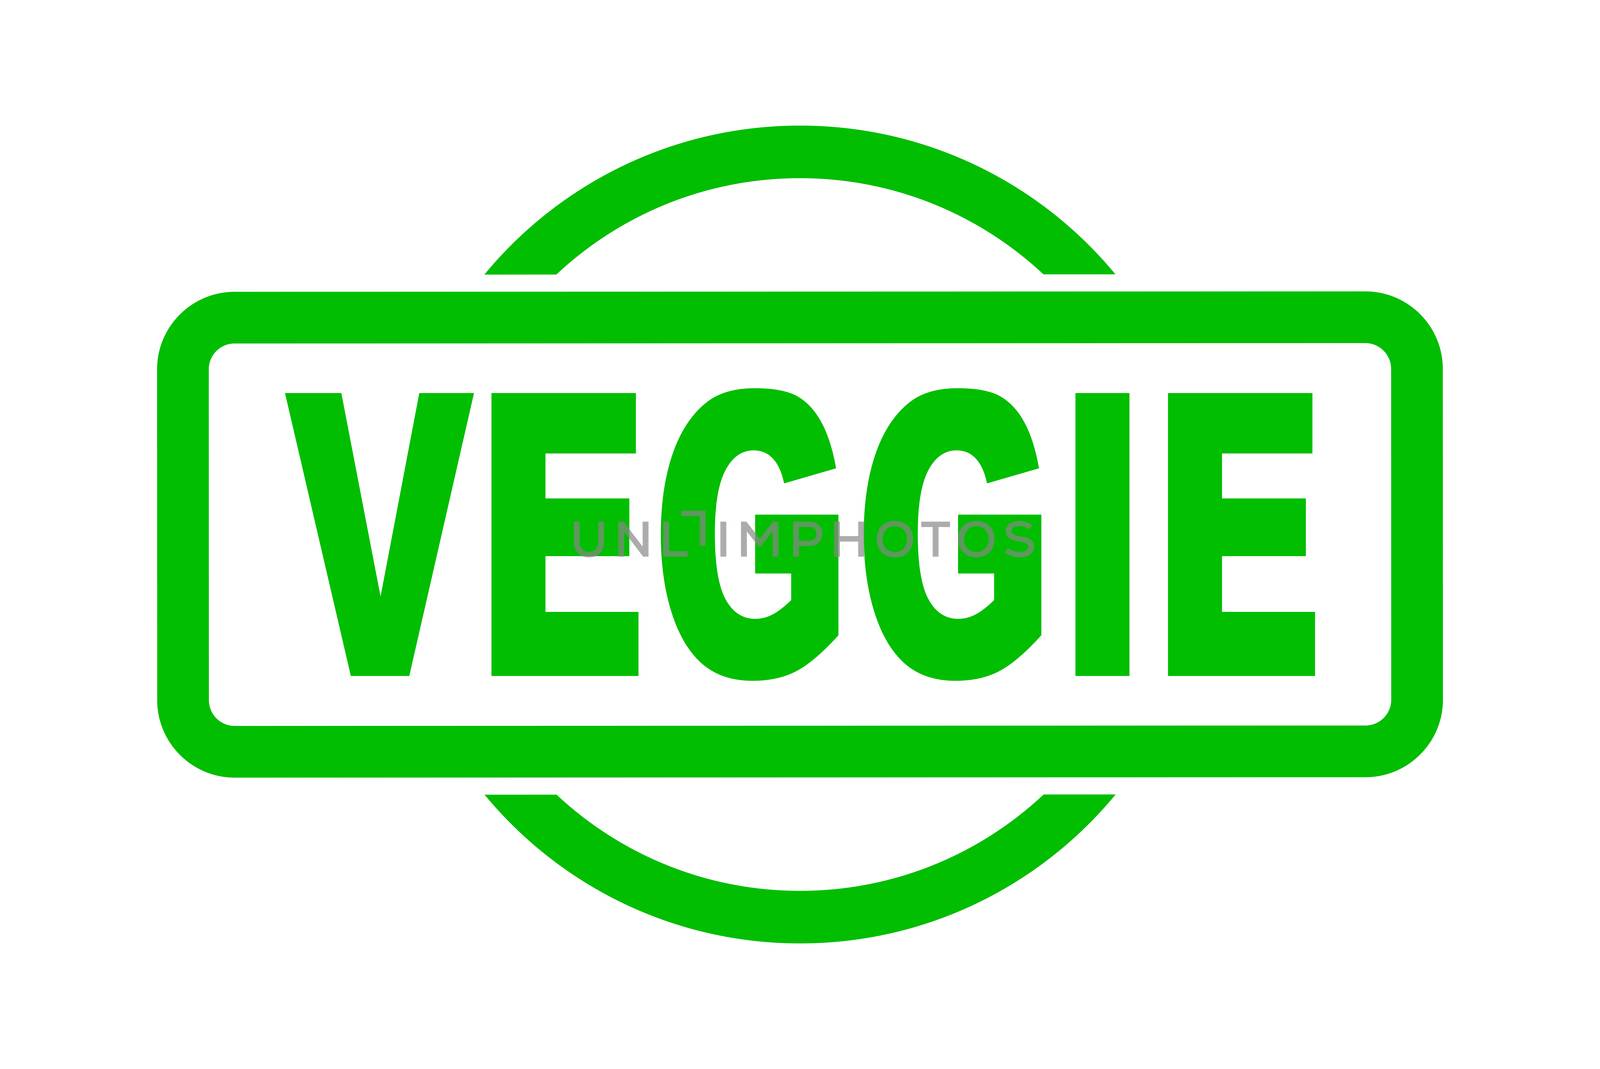 An veggie rubber stamp in green over a white background